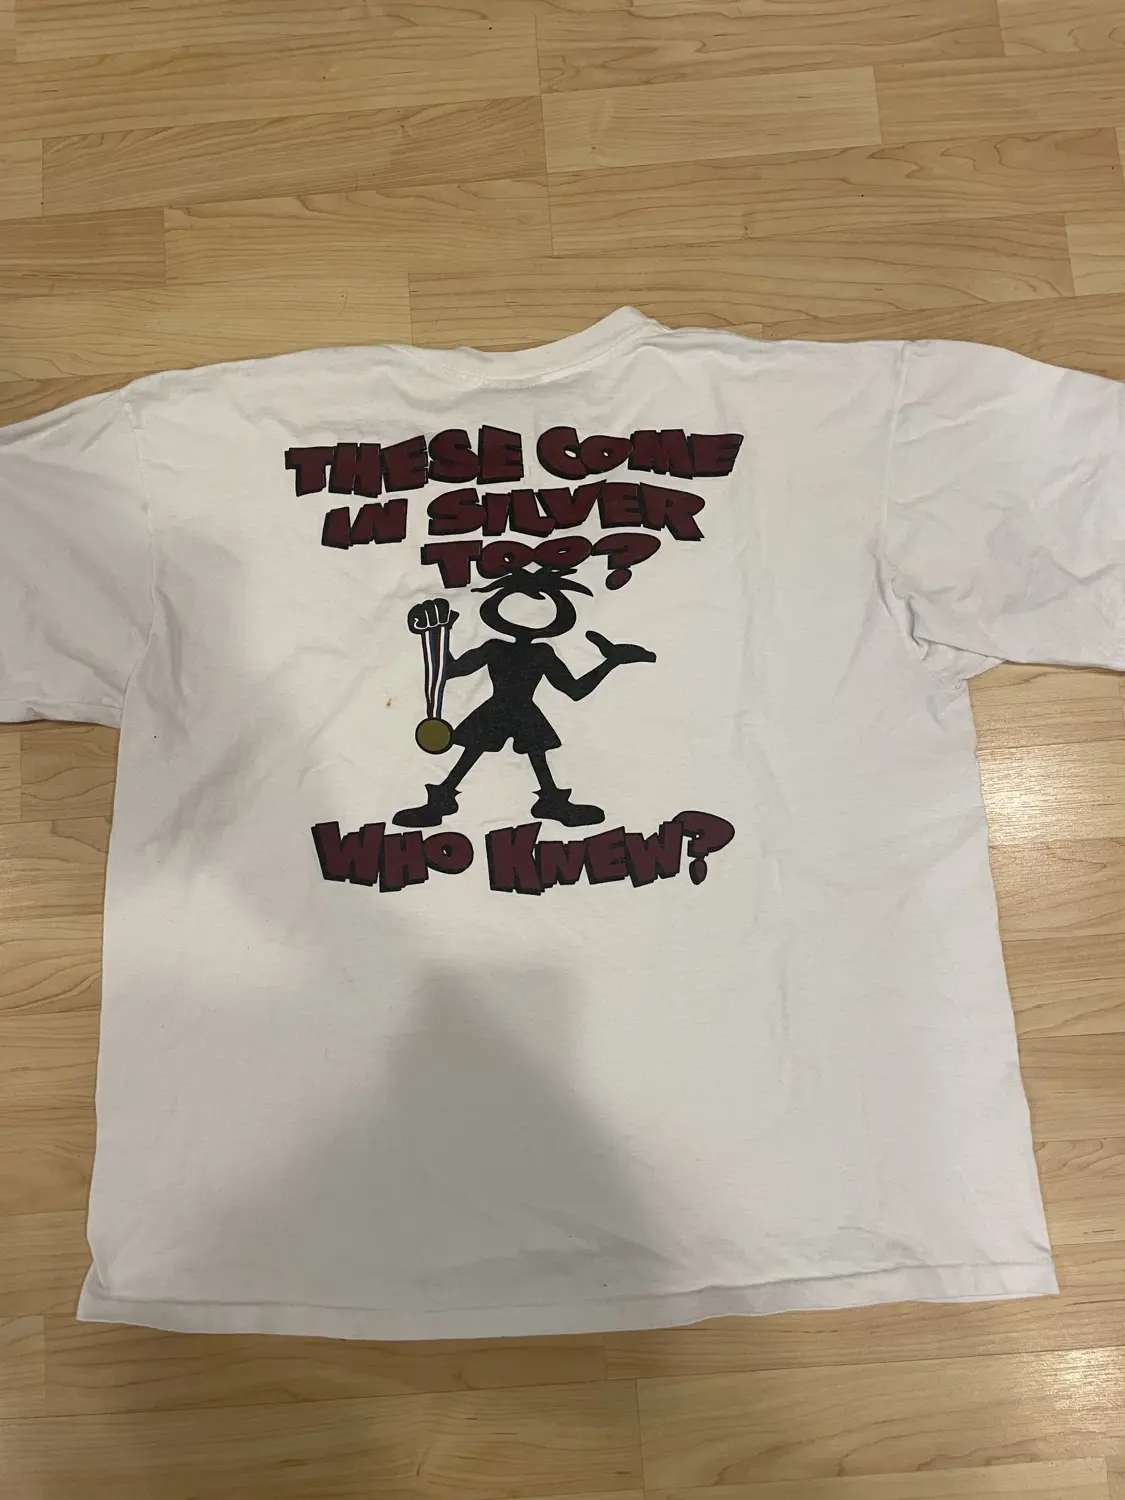 Obscure “These come in silver” Chump Tee XL